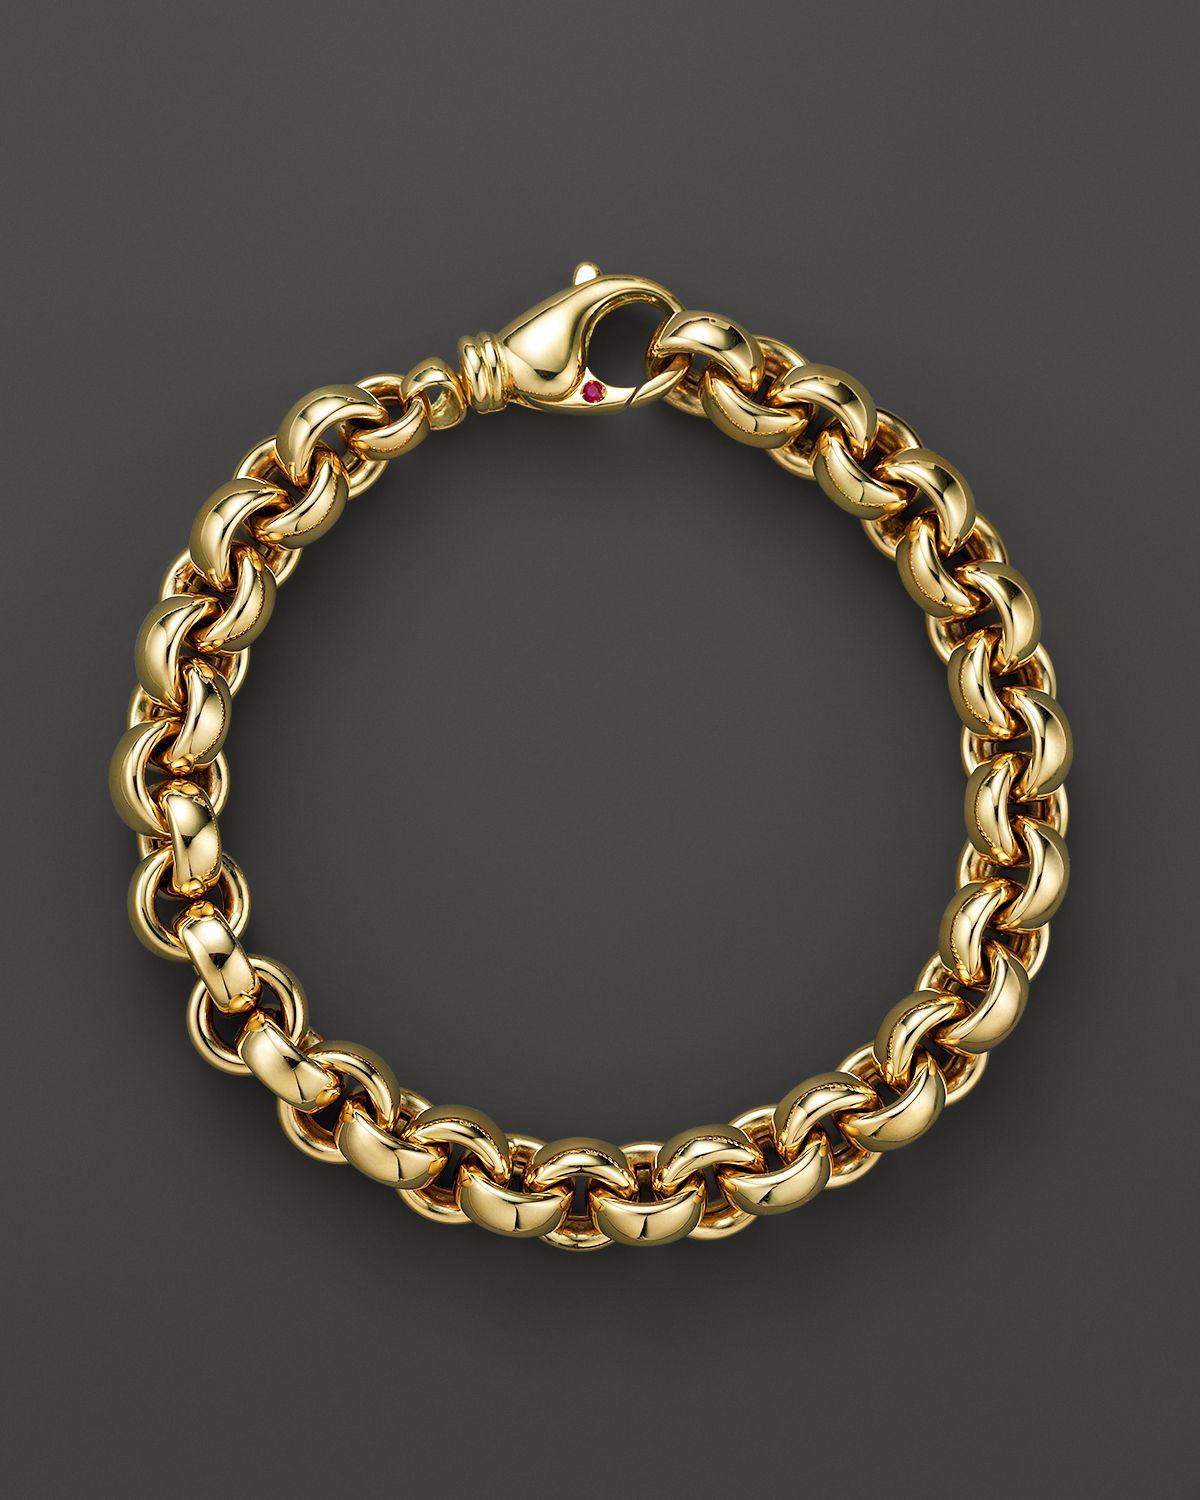 Roberto coin 18k Yellow Gold Small Round Link Bracelet - Bloomingdale's